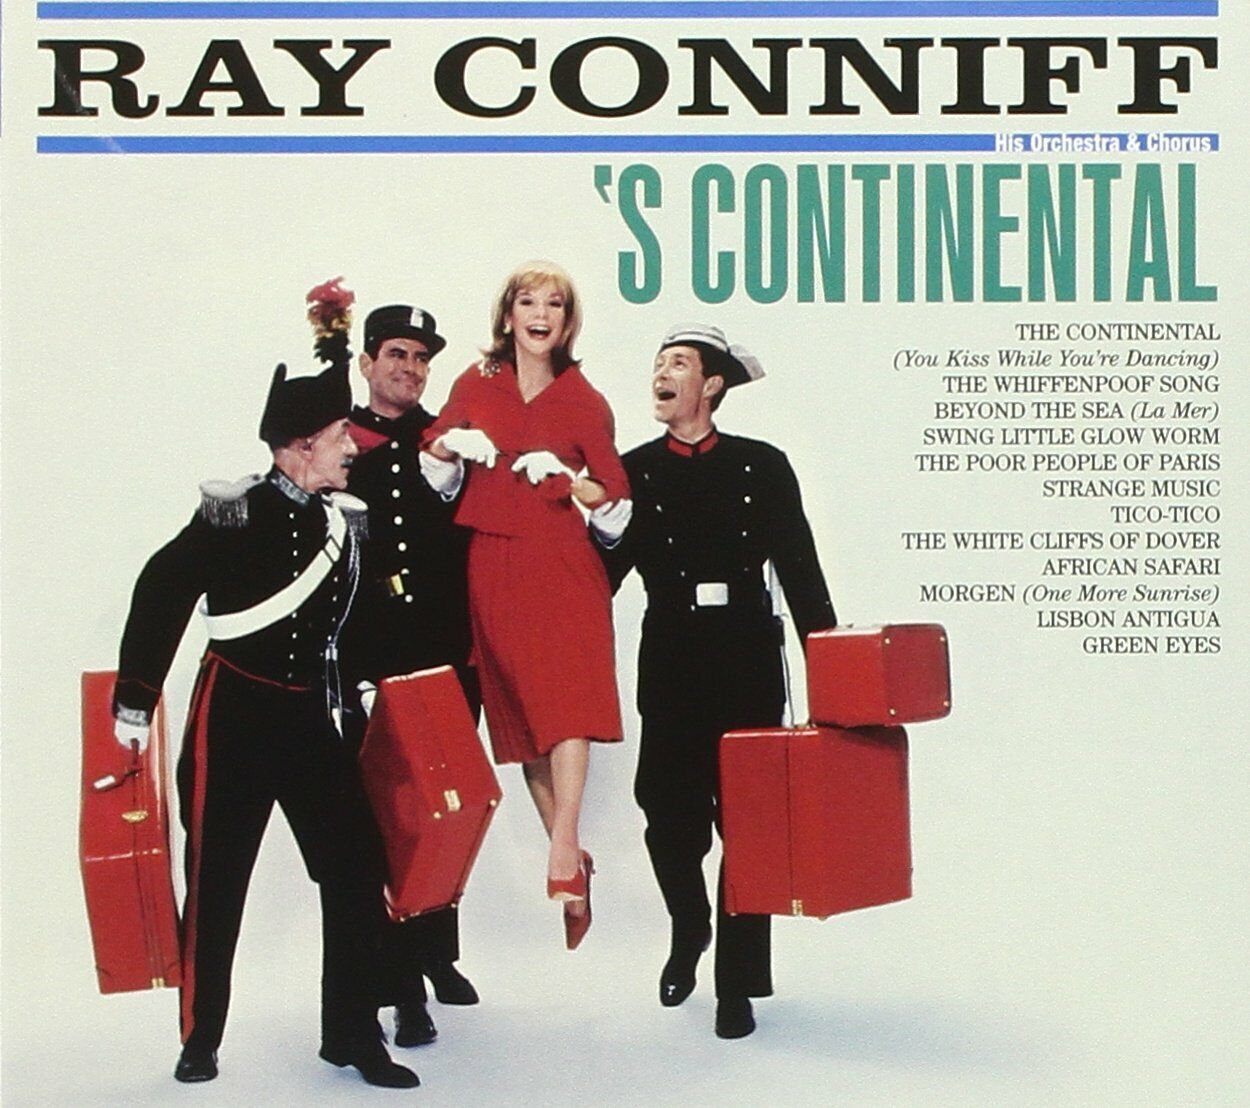 Ray Conniff 'S Continental + So Much In Love